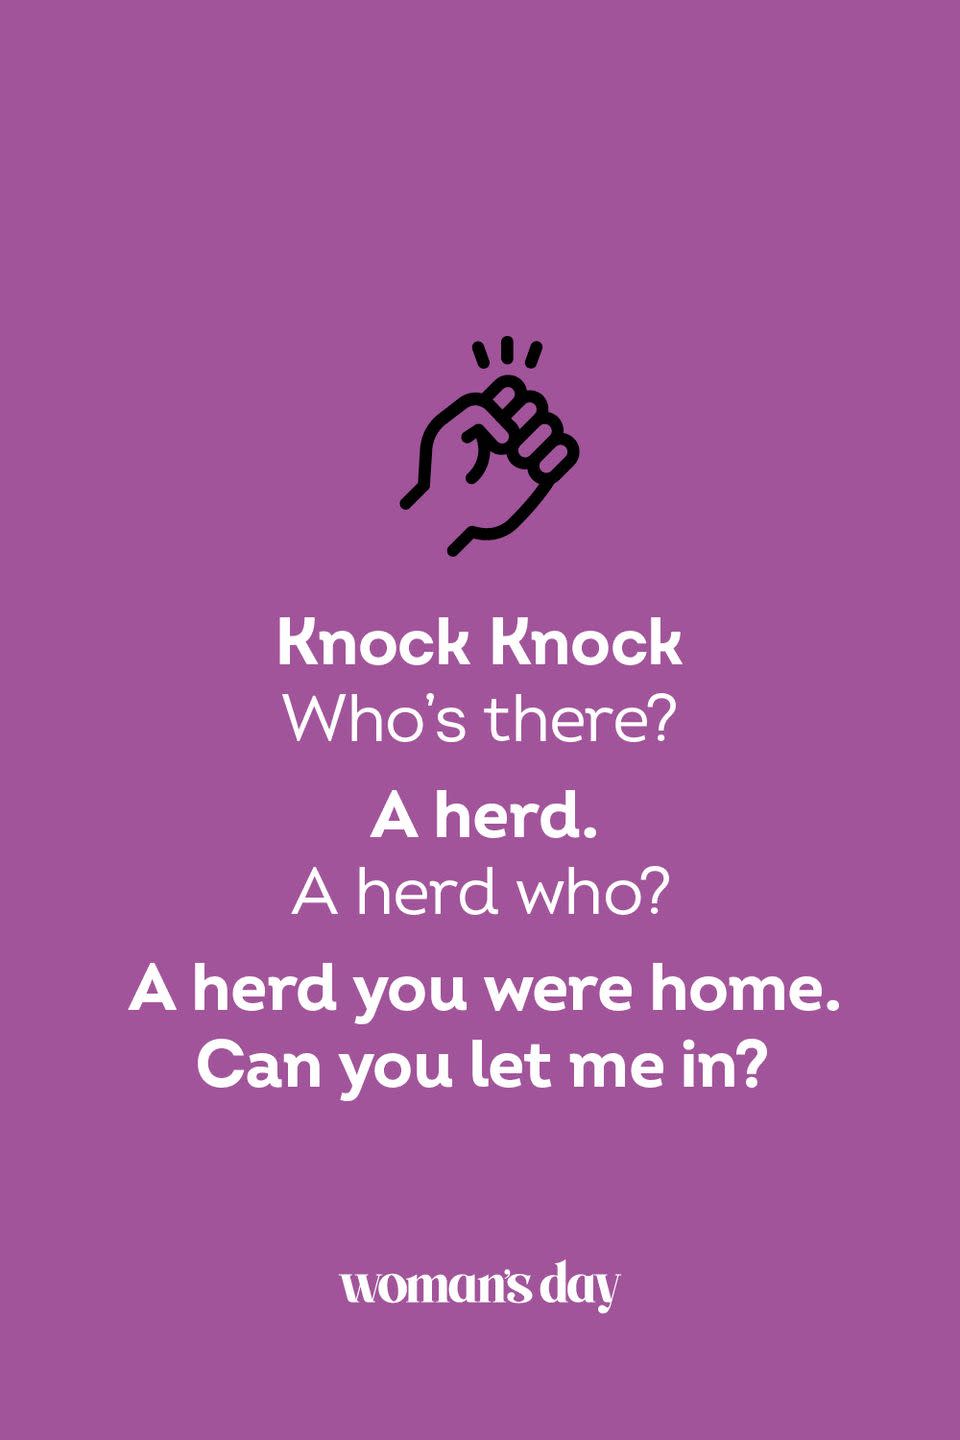 <p><strong>Knock Knock</strong></p><p><em>Who’s there? </em></p><p><strong>A herd.</strong></p><p><em>A herd who?</em></p><p><strong>A herd you were home. Can you let me in?</strong></p>